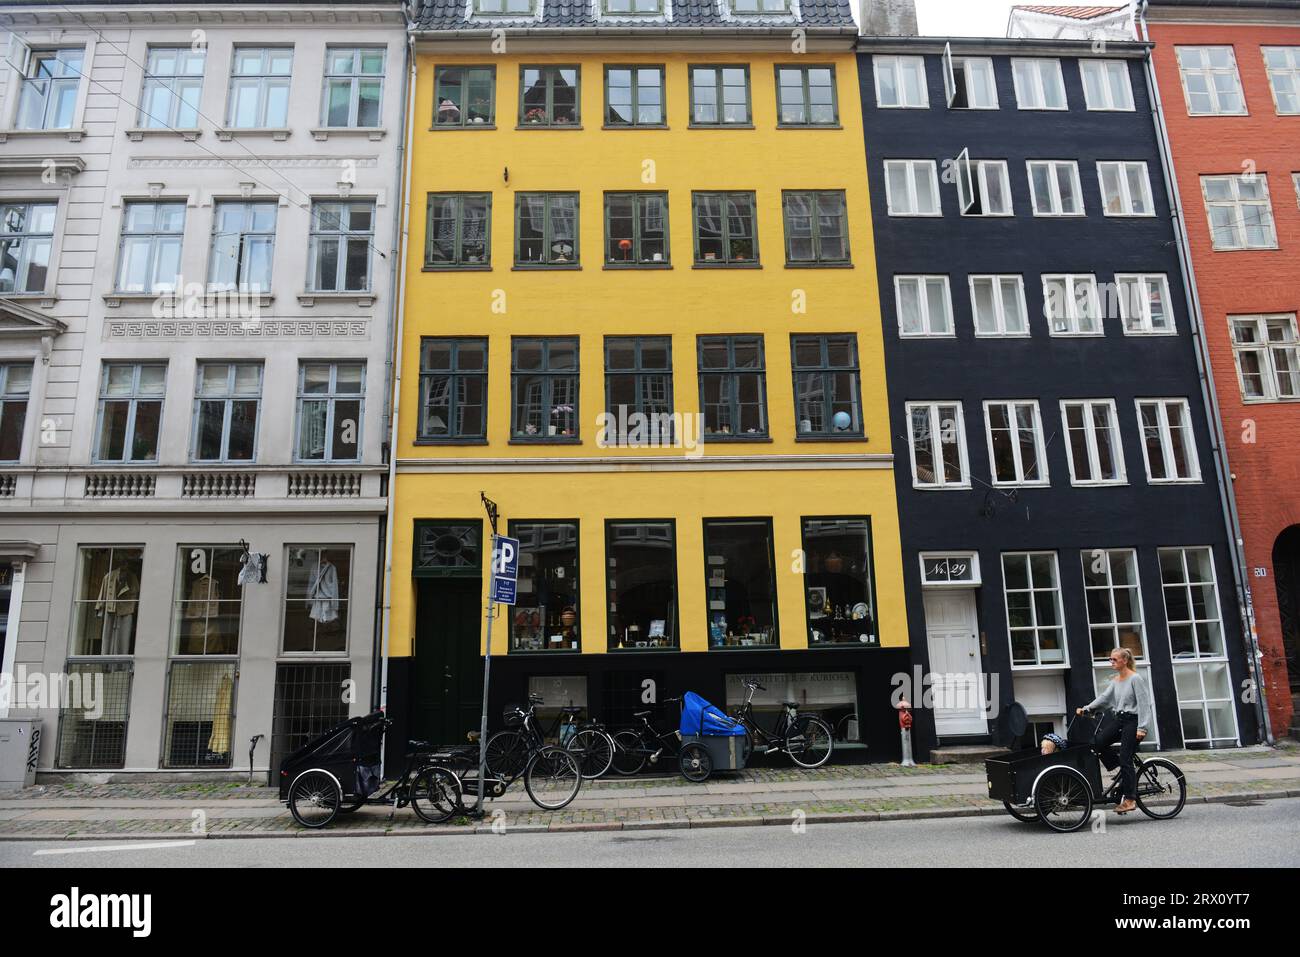 A Danish woman cycling in front of a Colorful building along Gammel Mønt in central Copenhagen, Denmark. Stock Photo